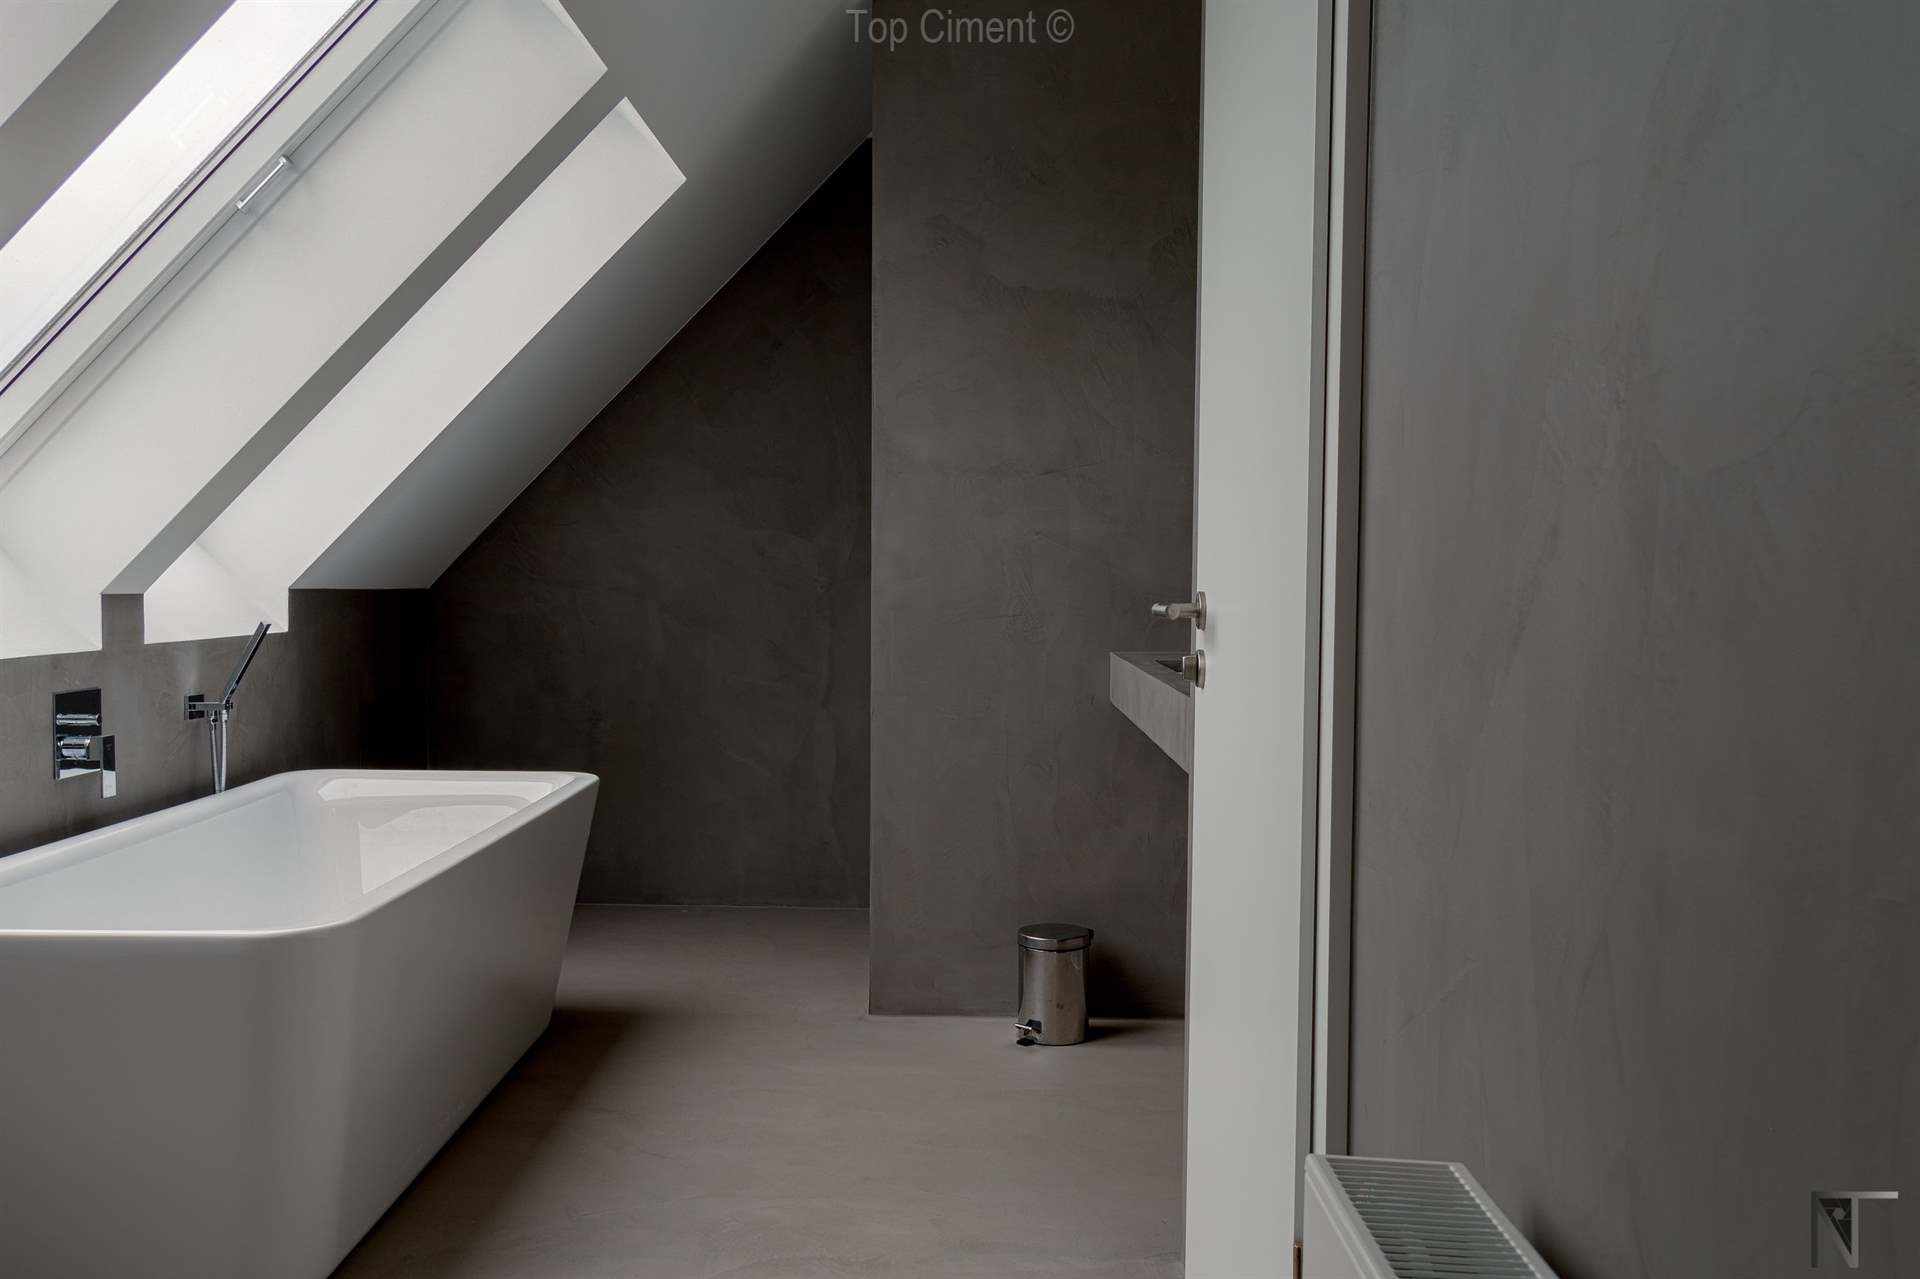 Bathroom tiled renovated with Microfino Topciment microcement